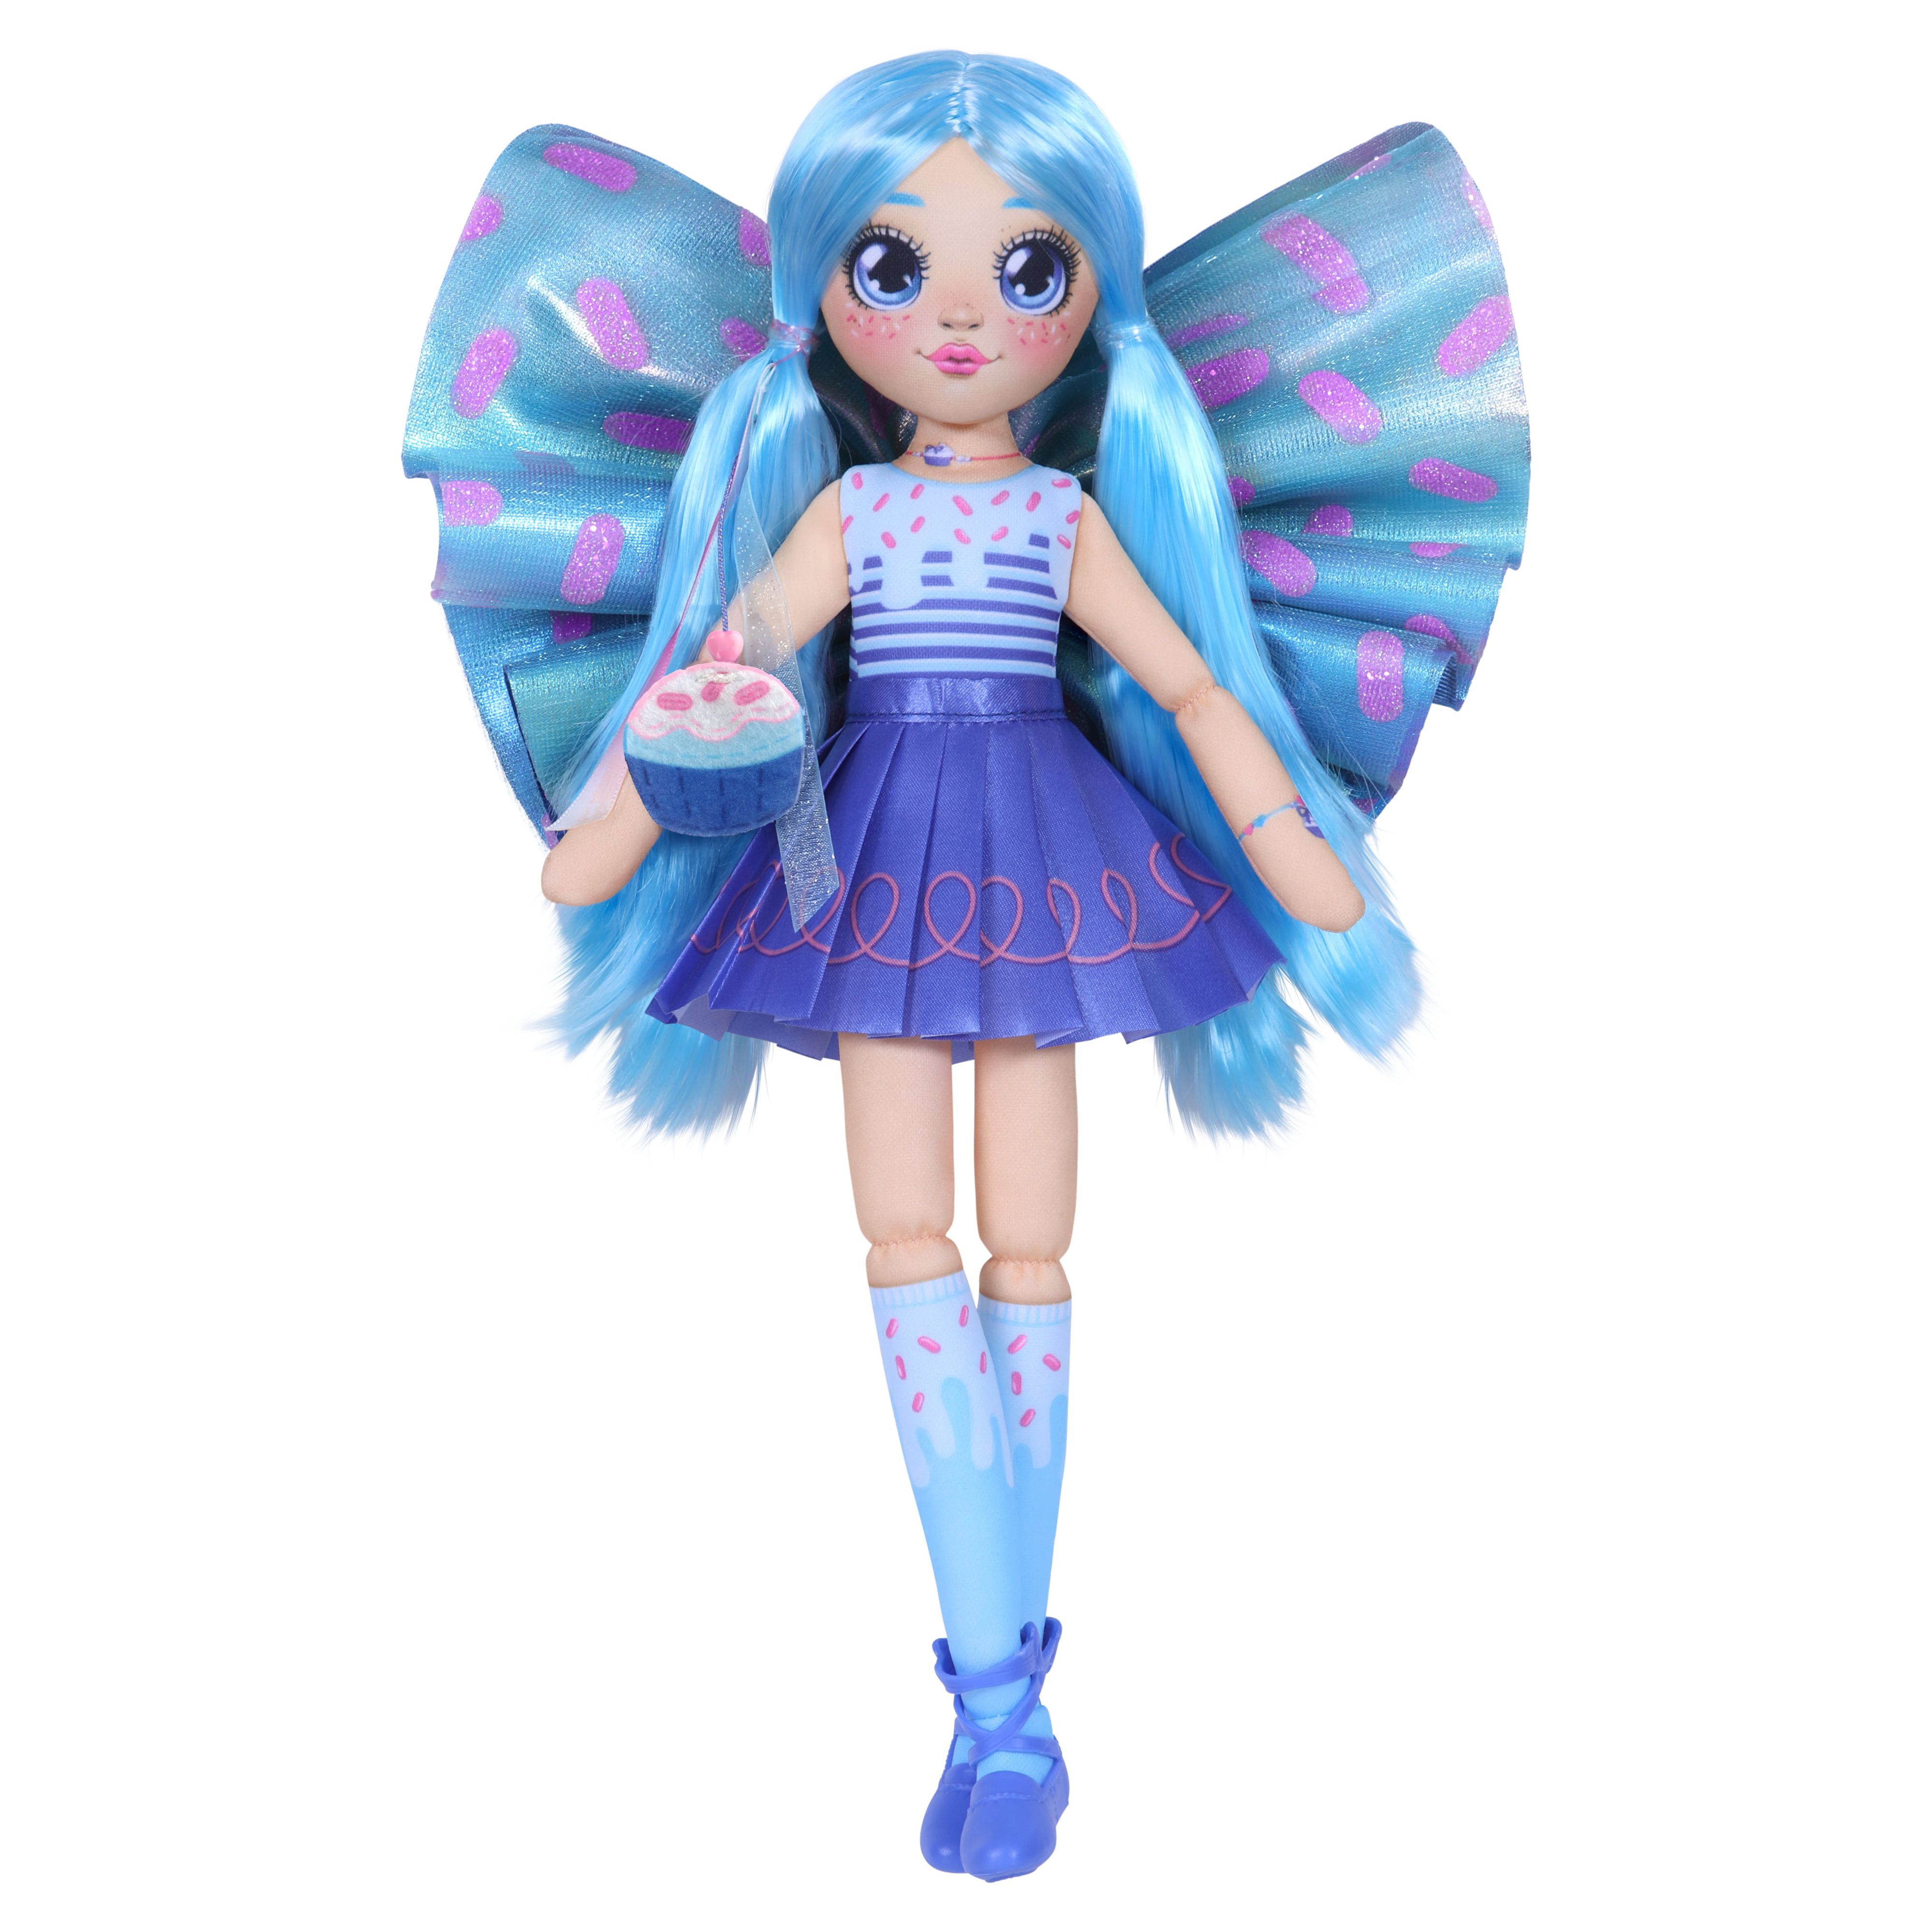 Dream Seeker Magical Fairy Fashion Doll 3 Pack, Candice, Lolli-Ana and Coco, Girls 5+ - image 3 of 13